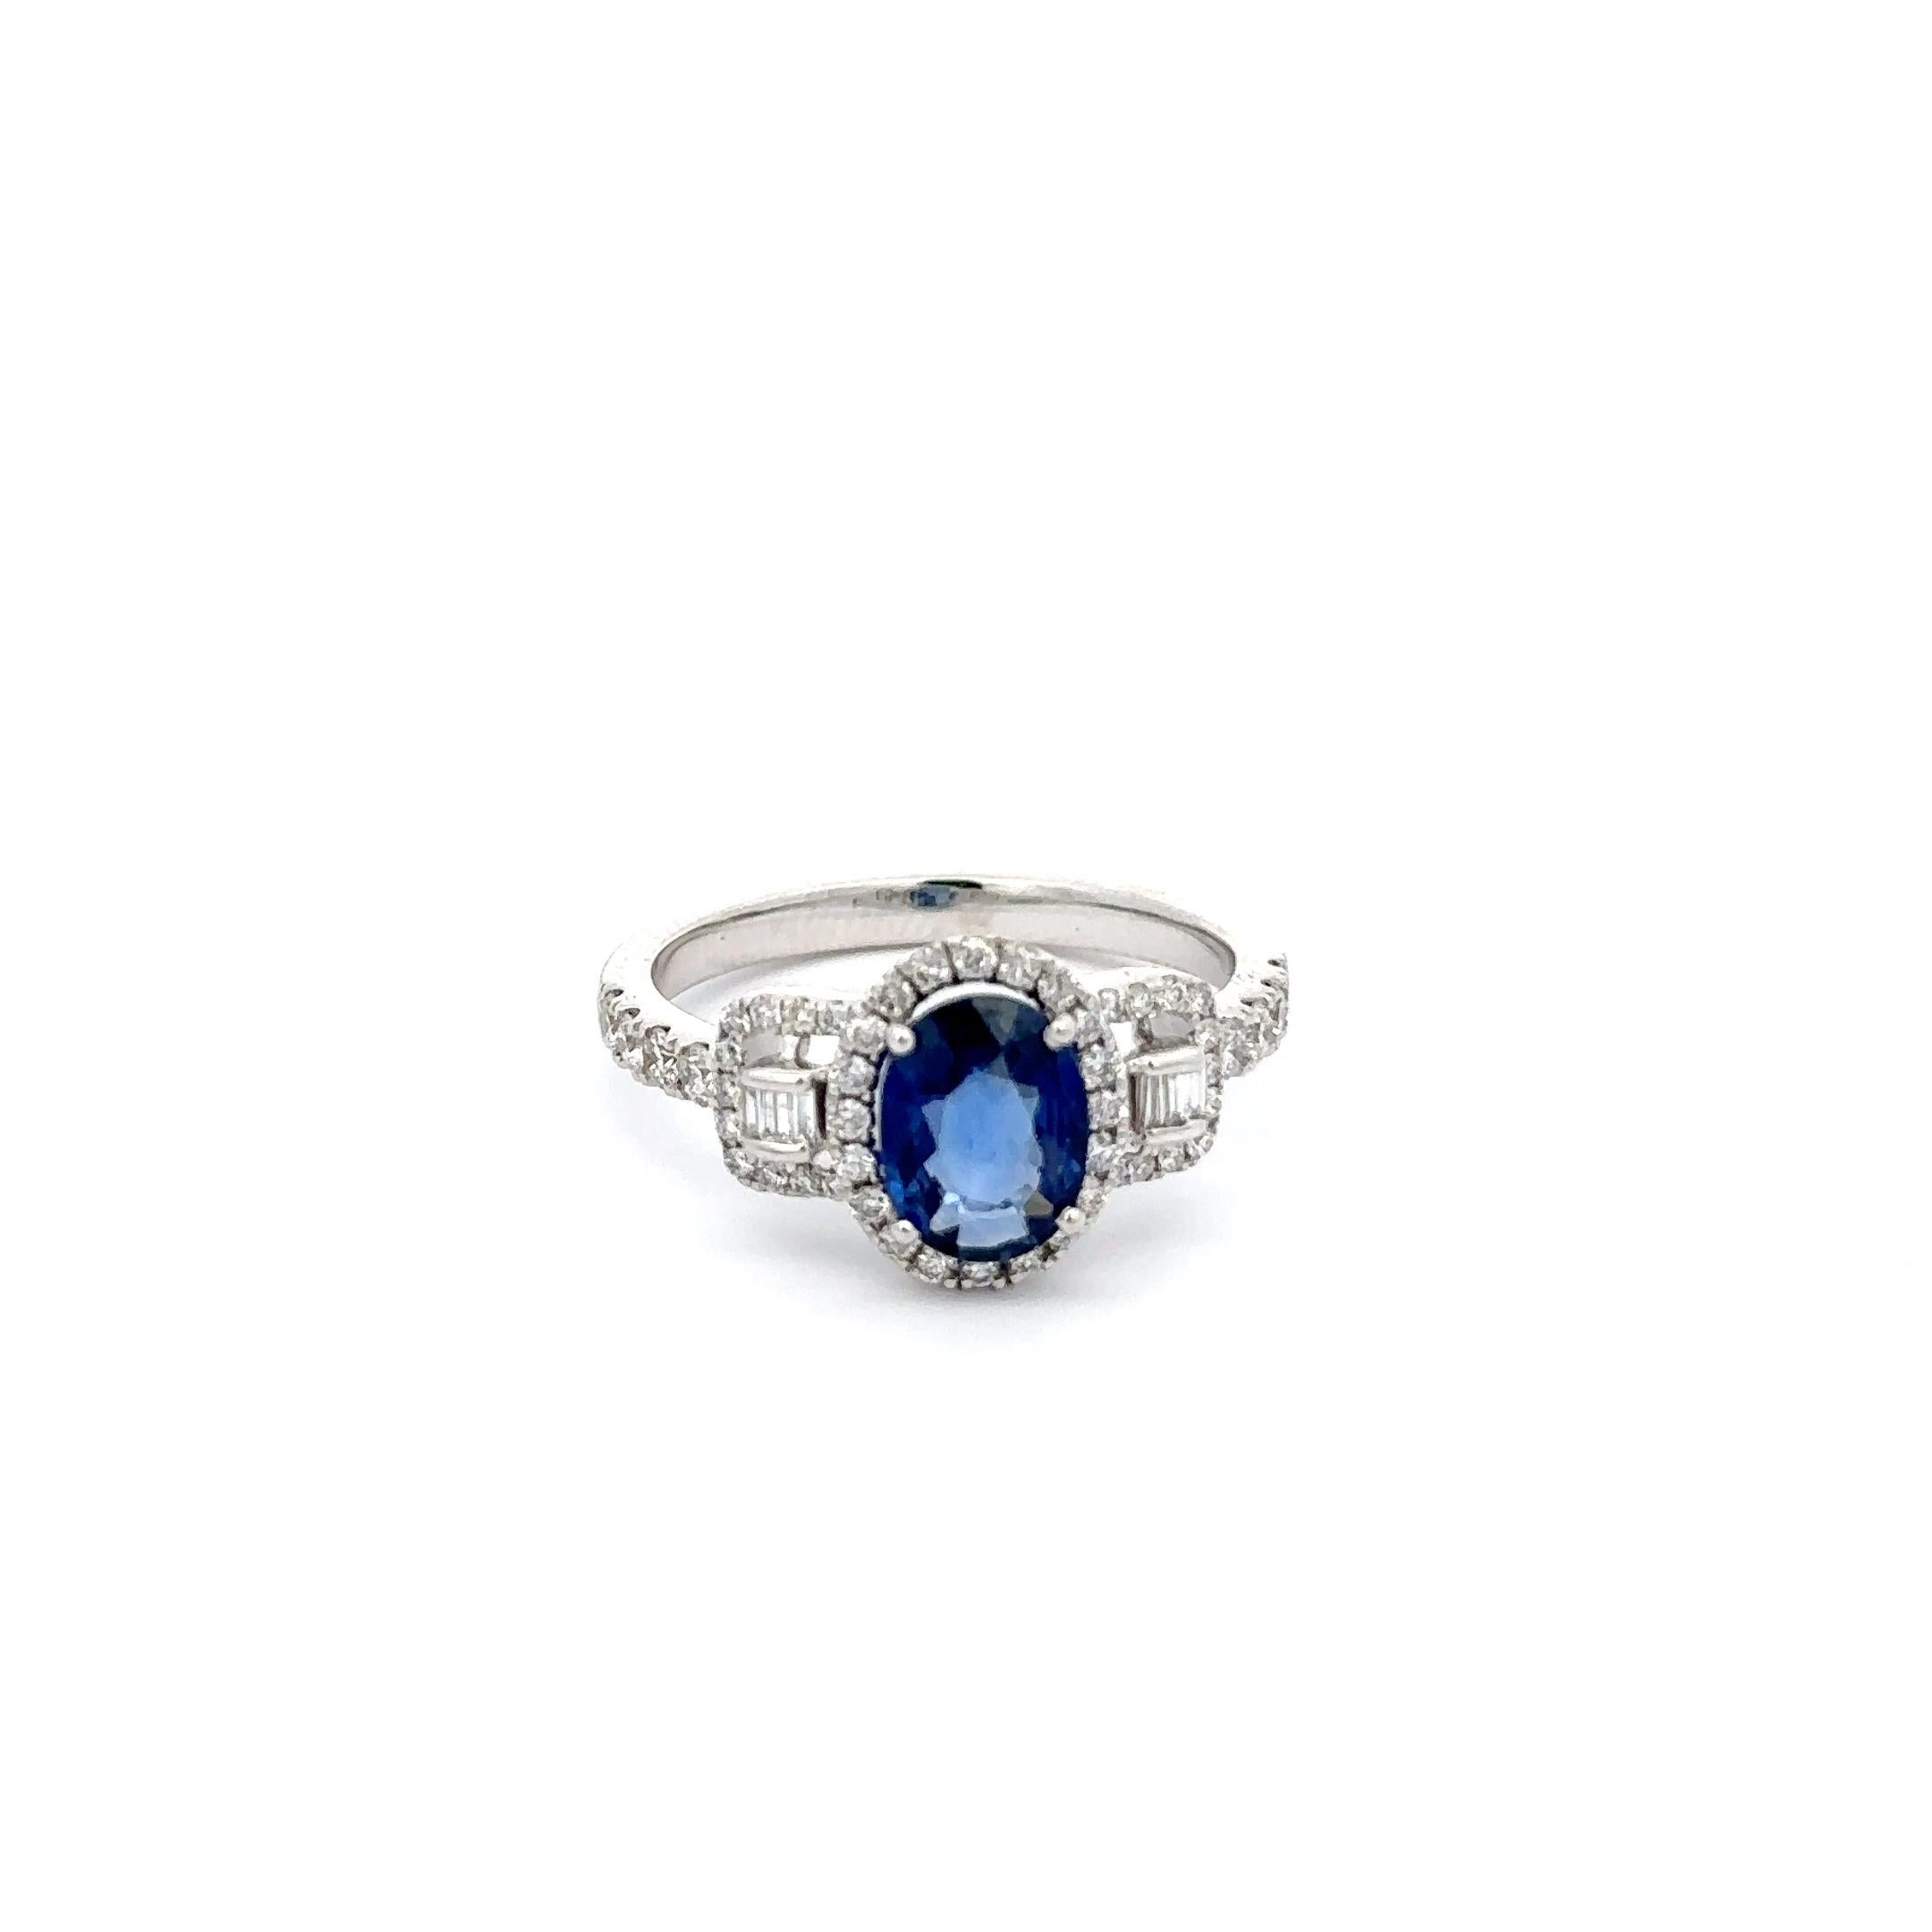 For Sale:  18k Solid White Gold Faceted Blue Sapphire Diamond Engagement Ring Certified 5